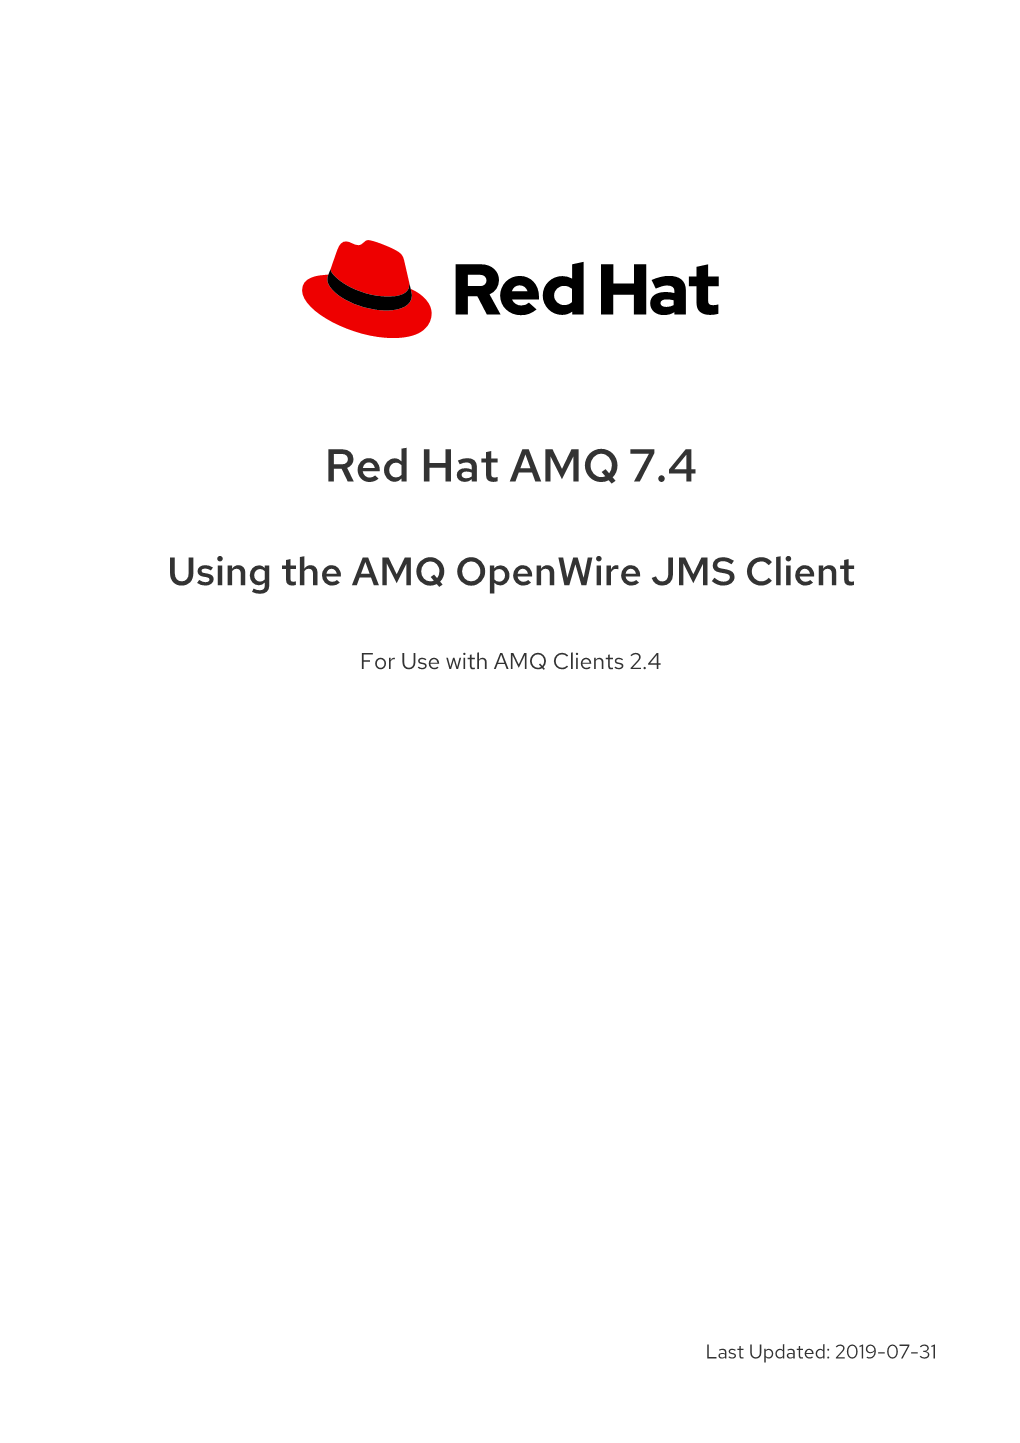 Red Hat AMQ 7.4 Using the AMQ Openwire JMS Client